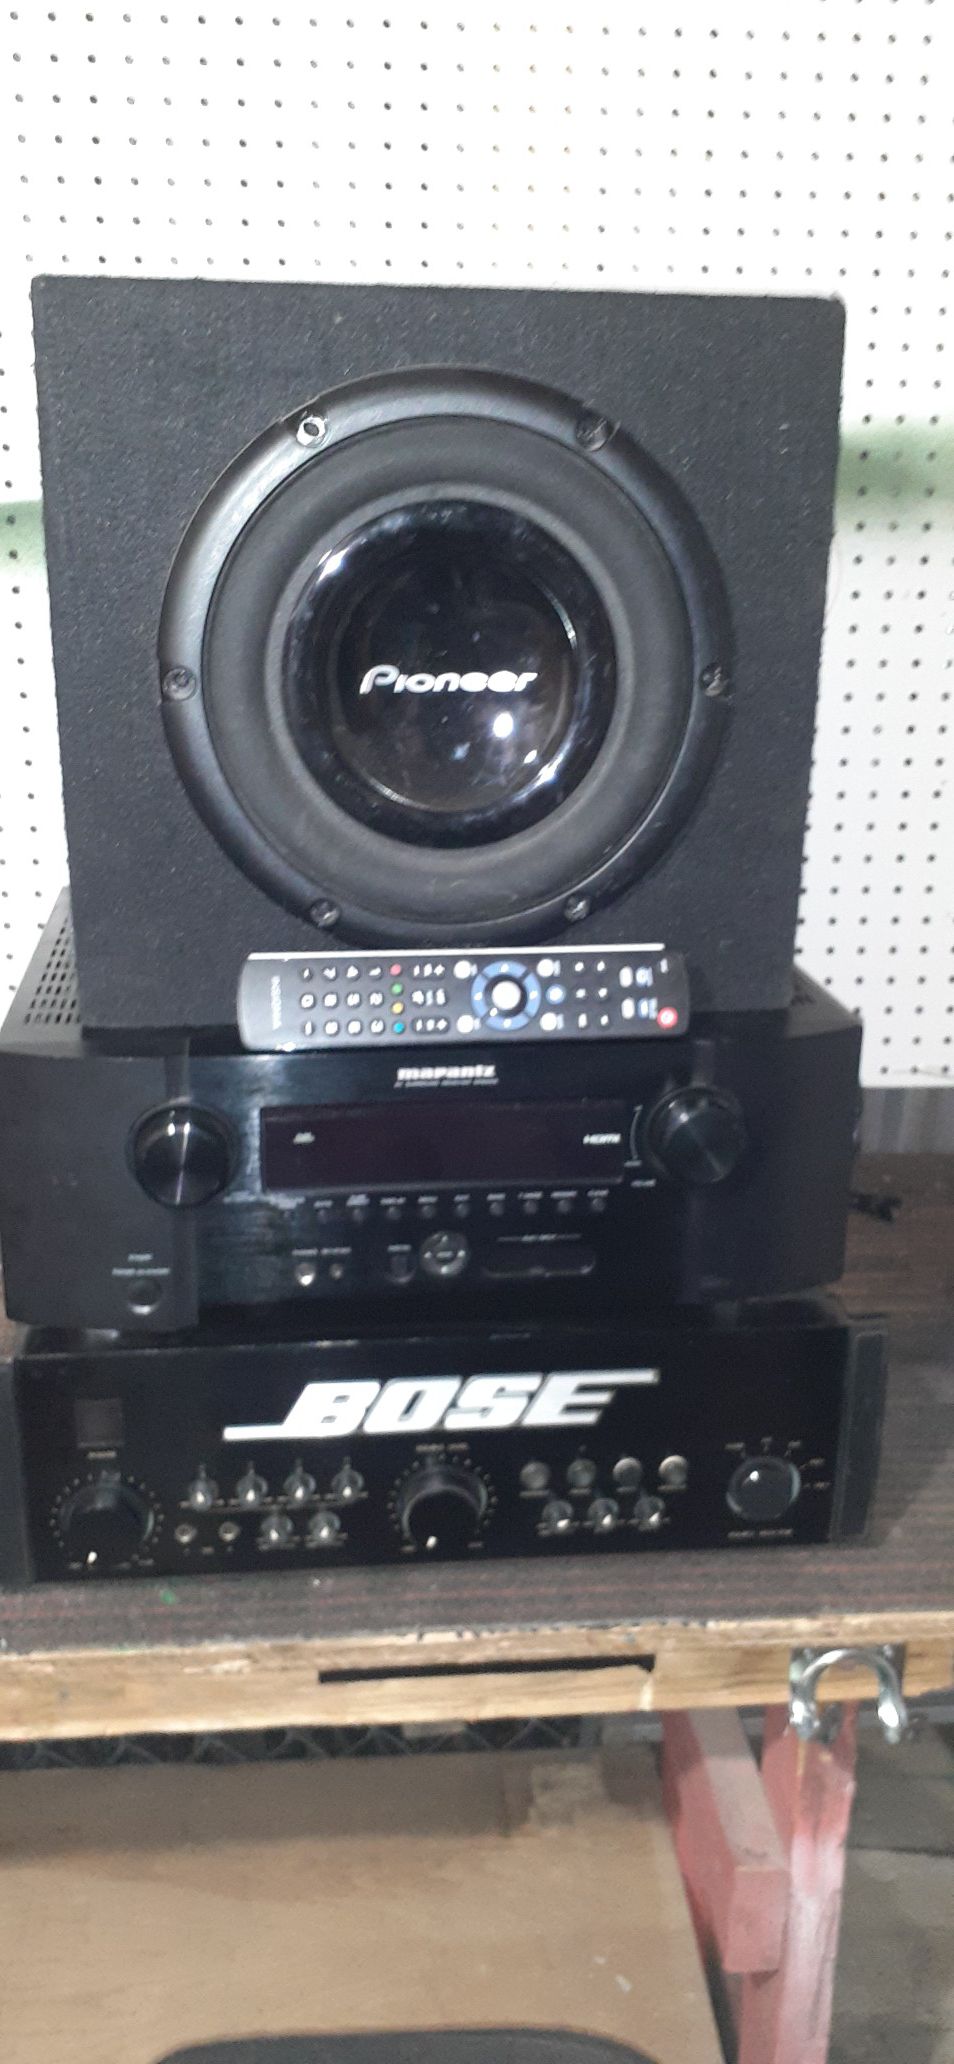 10" sub- reciever-amp- best of the best need the room must sell send me your offers